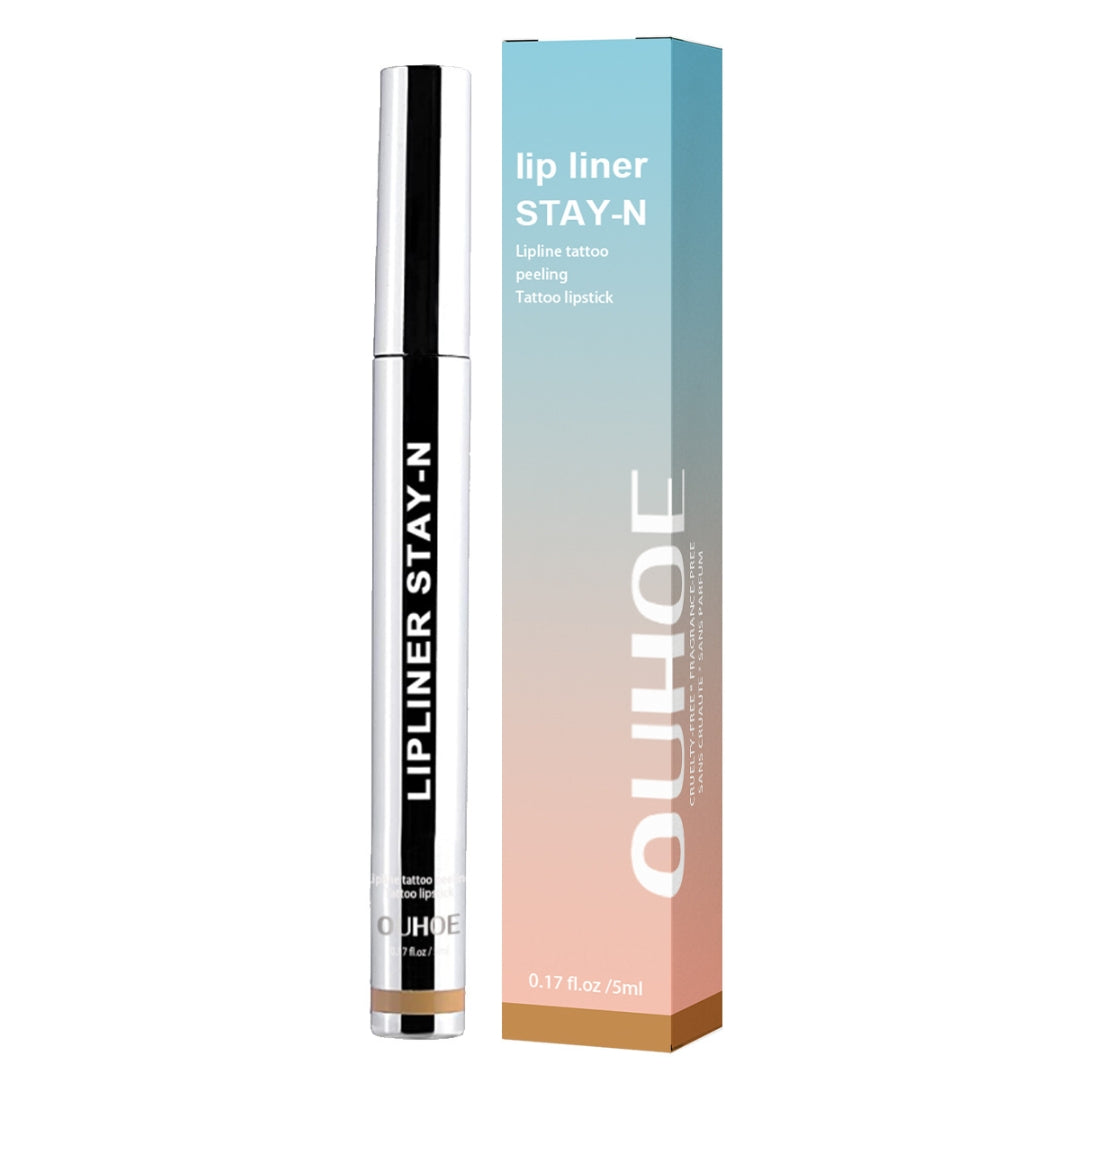 Sacheu Lip Liner Stay-N - Peel Off Lip Liner Tattoo, Peel Off Lip Stain, Long Lasting Lip Stain Peel Off, Infused with Hyaluronic Acid & Vitamin E, cLOVER